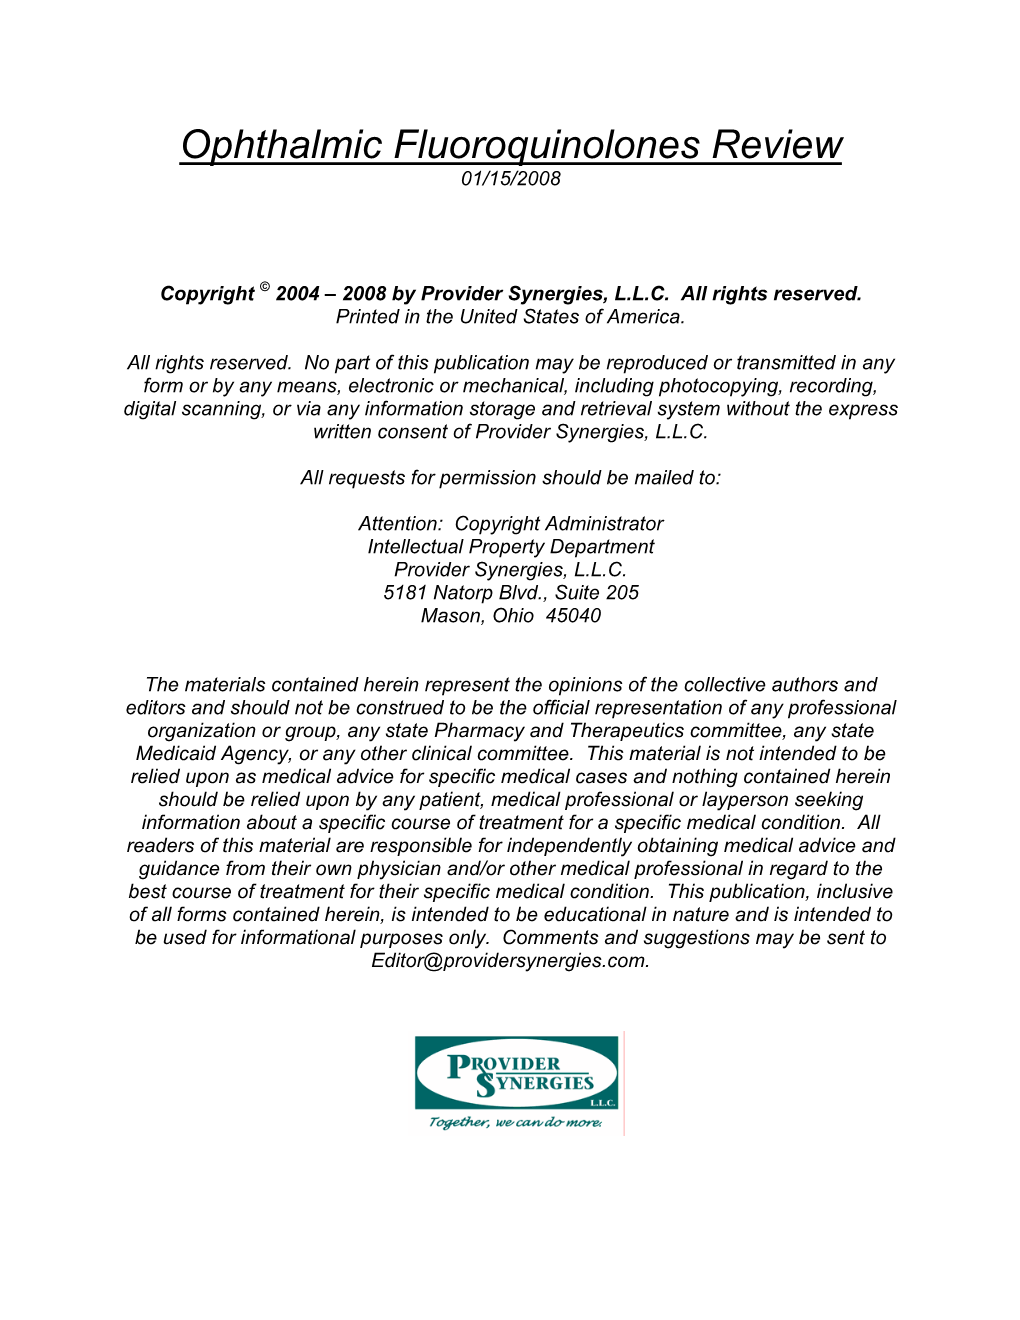 Ophthalmic Fluoroquinolones Review 01/15/2008